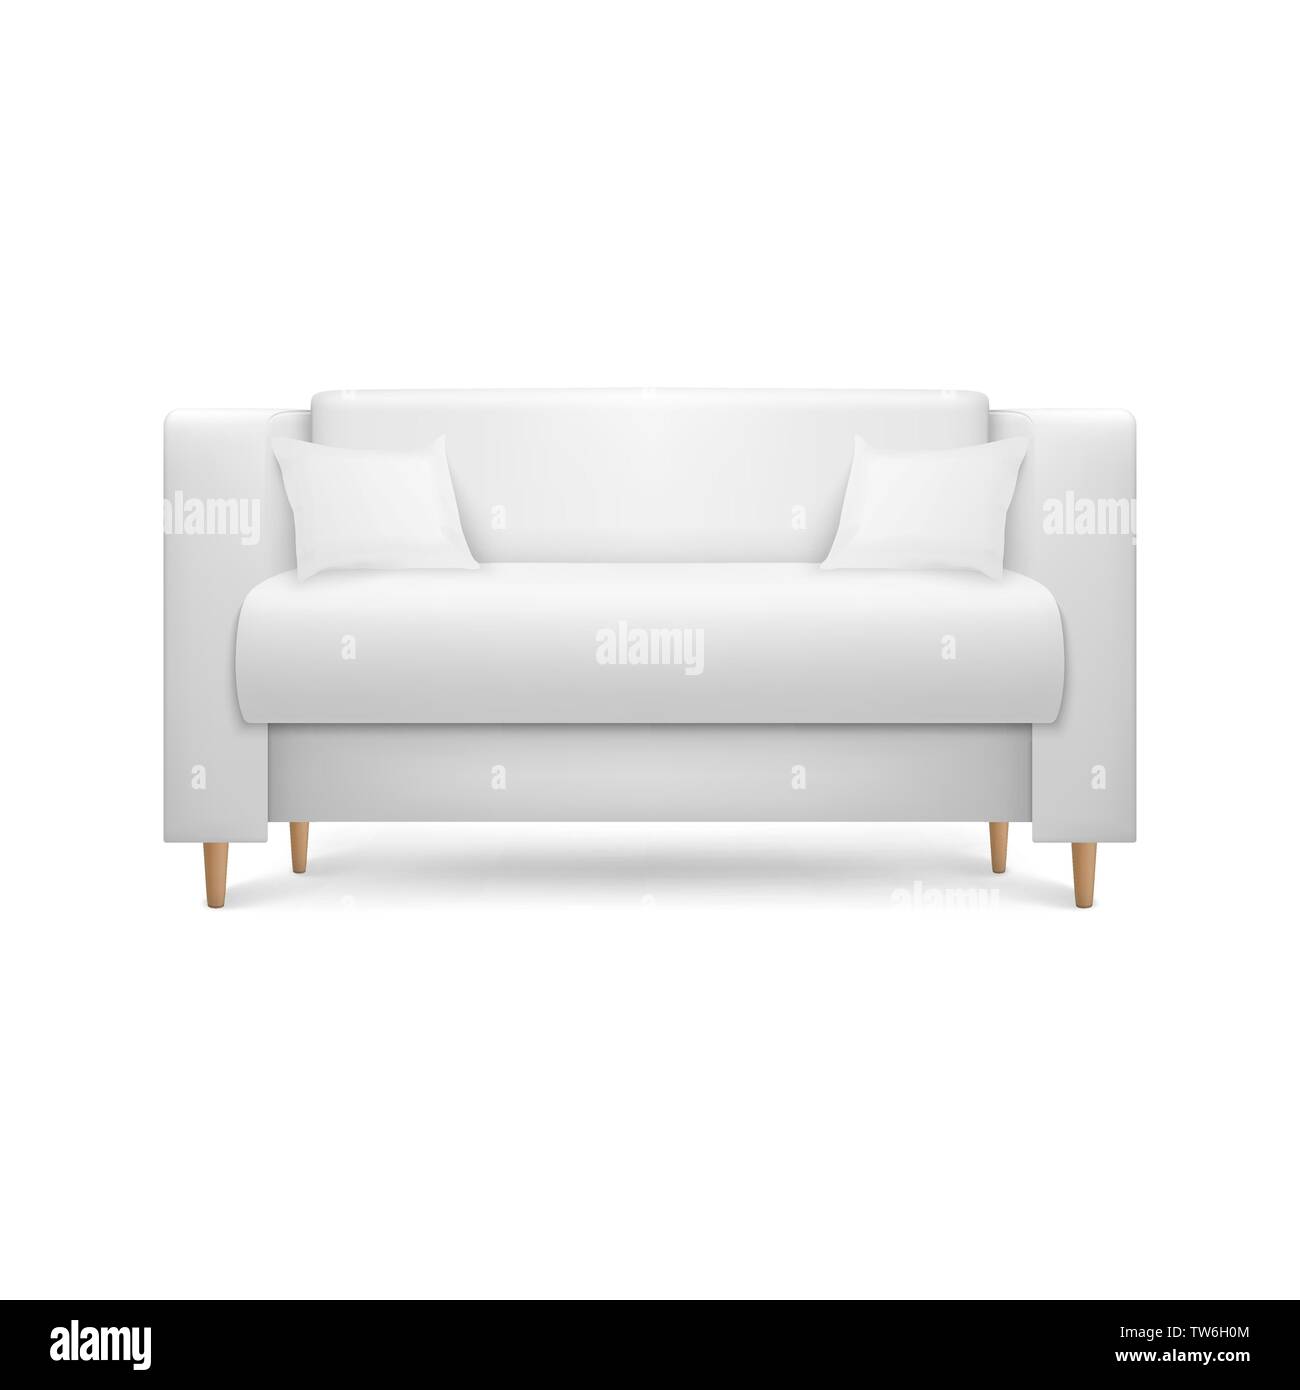 Vector 3d Realistic Render White Leather Luxury Office Sofa, Couch with Pillows in Simple Modern Style for Interior Design, Living Room, Reception or Stock Vector